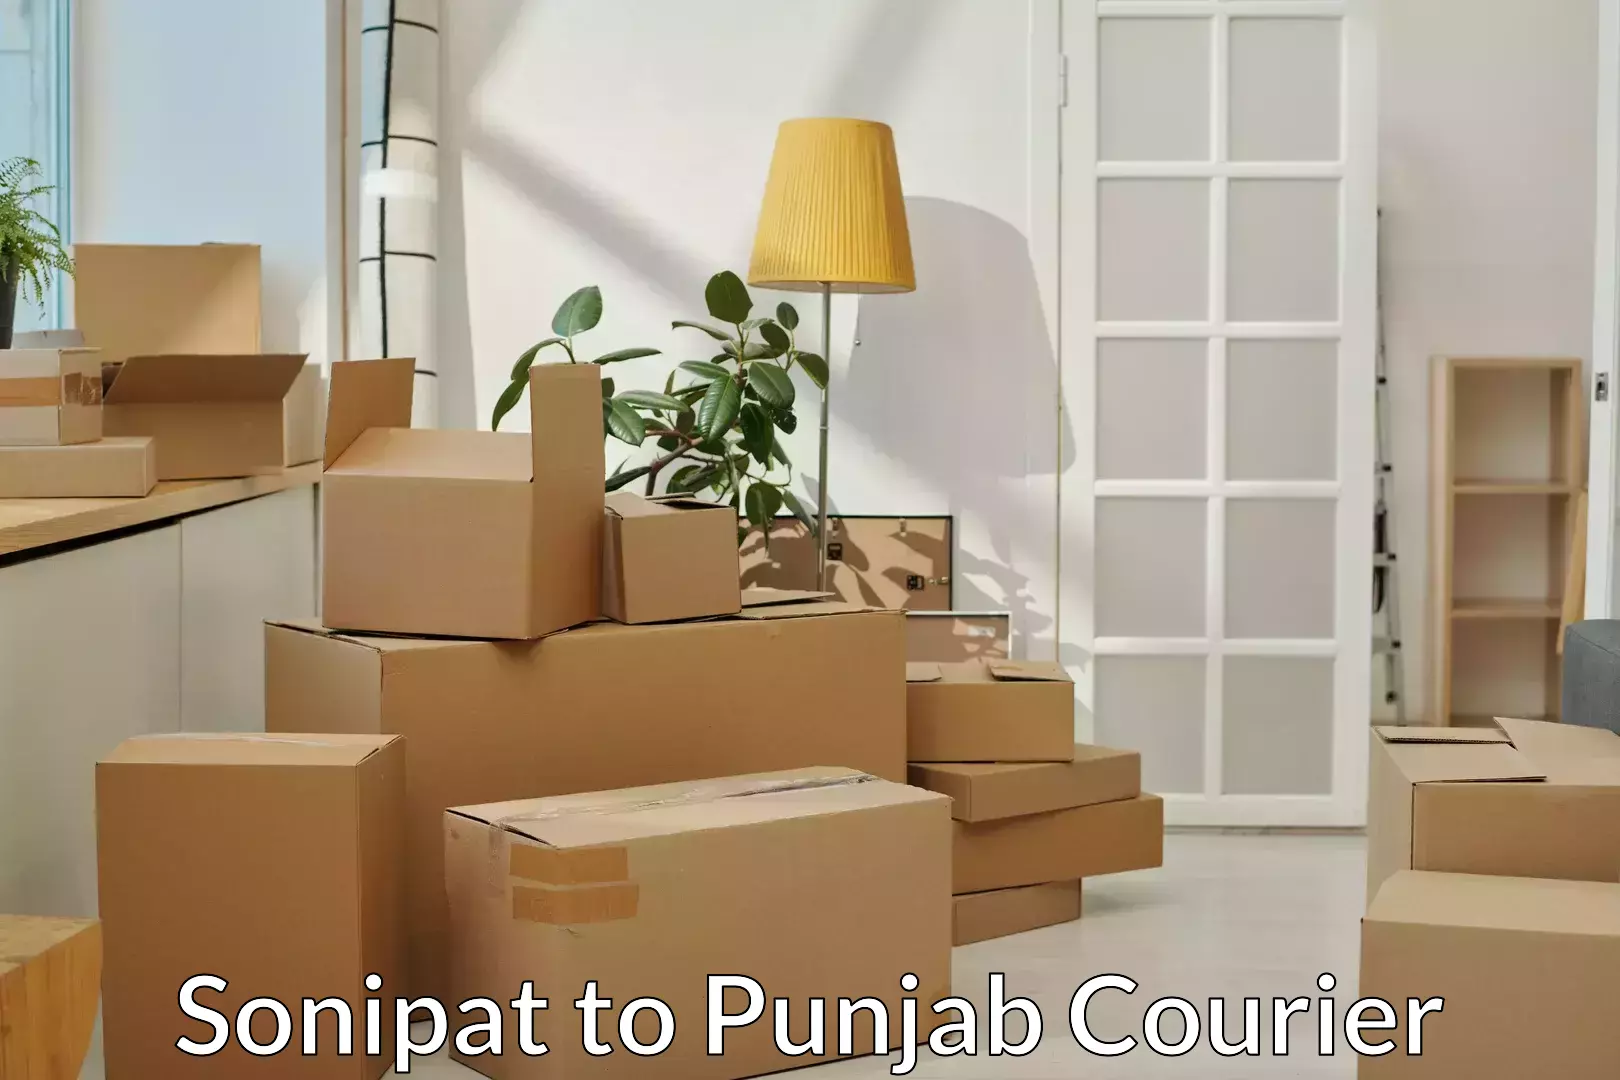 Full-service relocation in Sonipat to Jalandhar